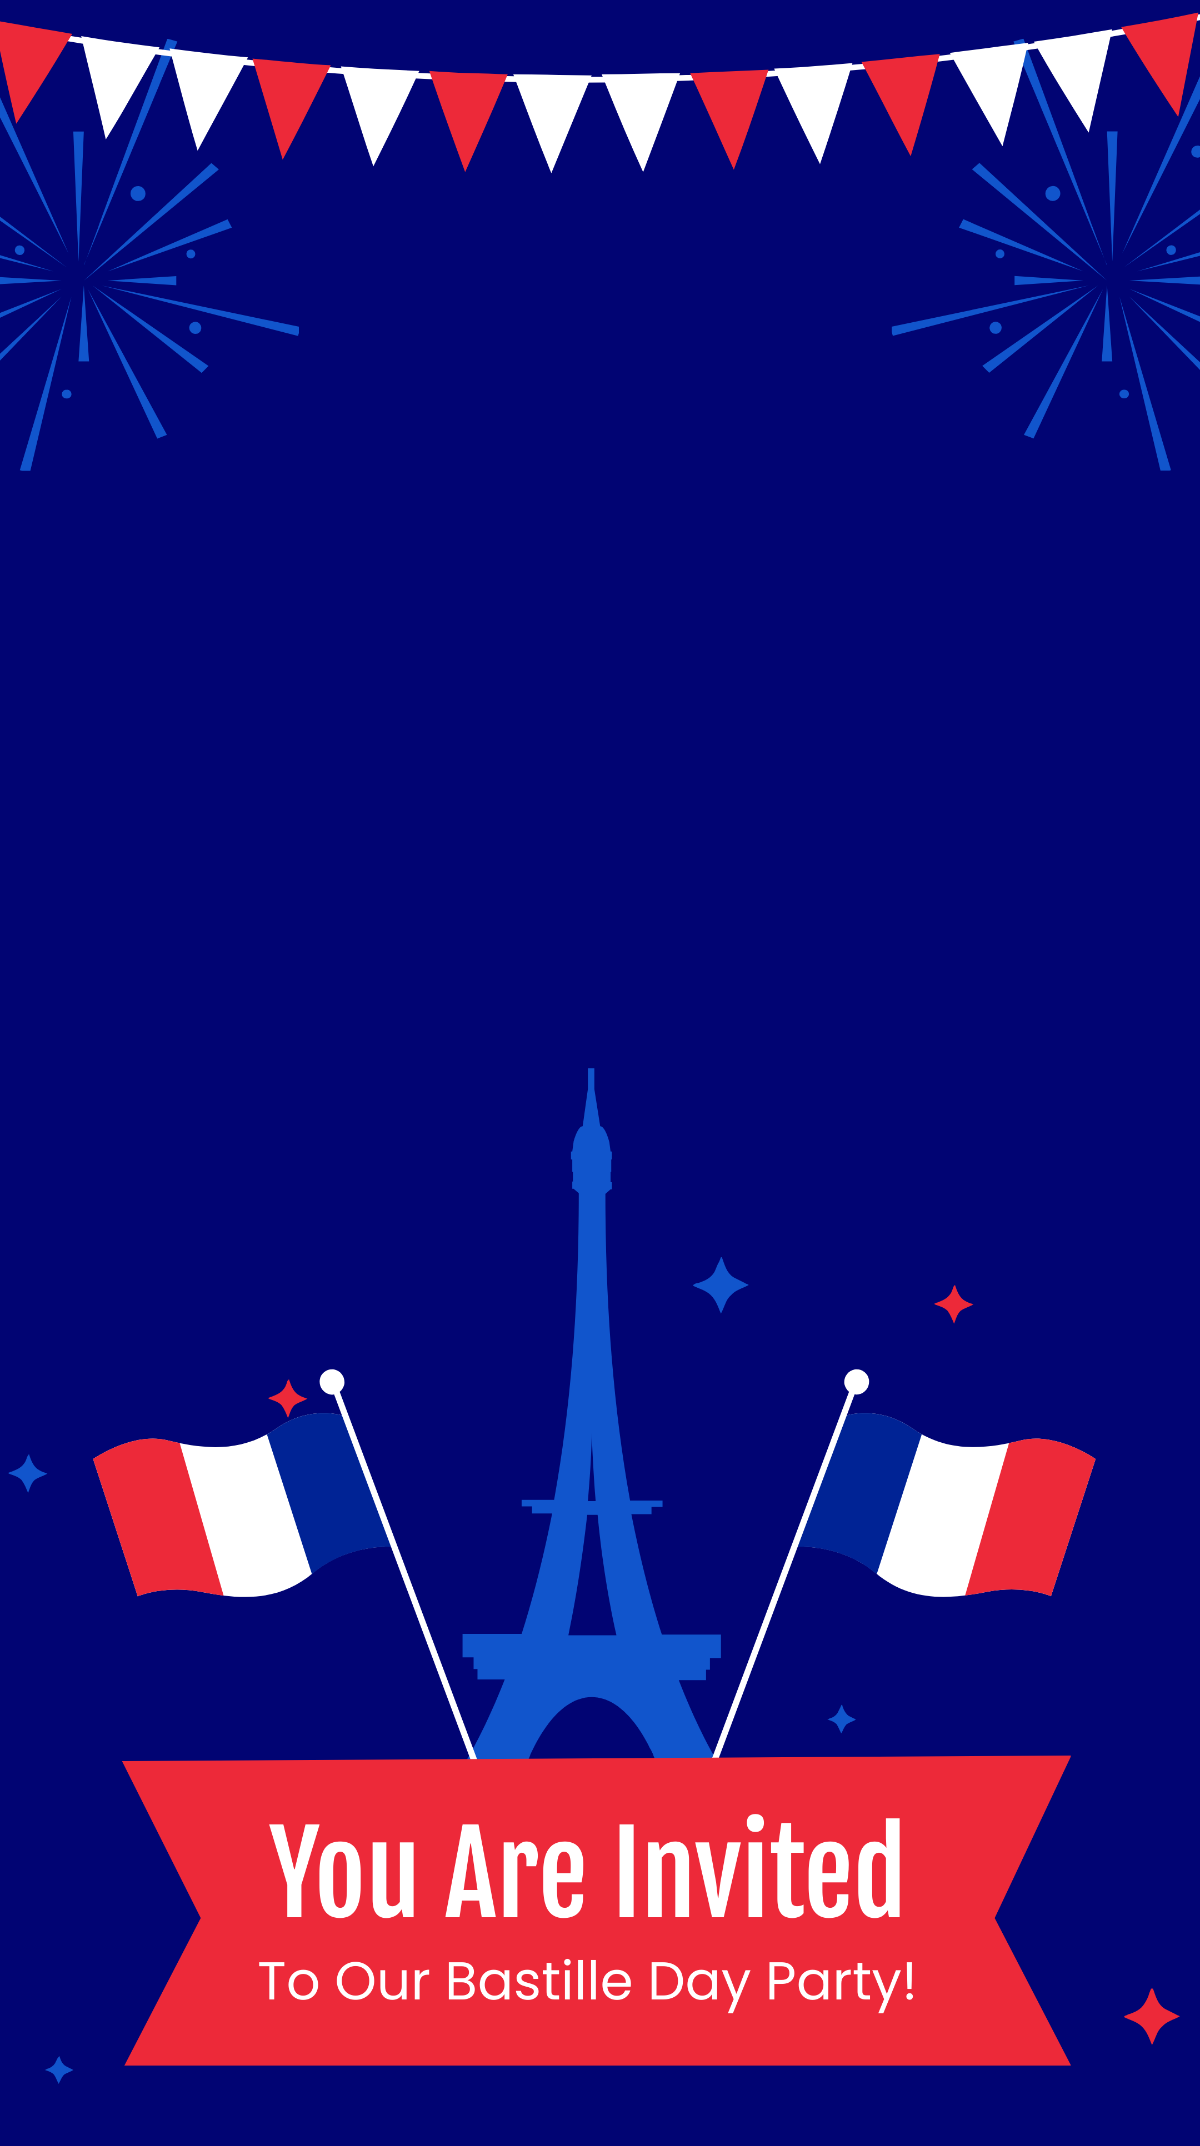 Bastille Day Party Snapchat Geofilter Template